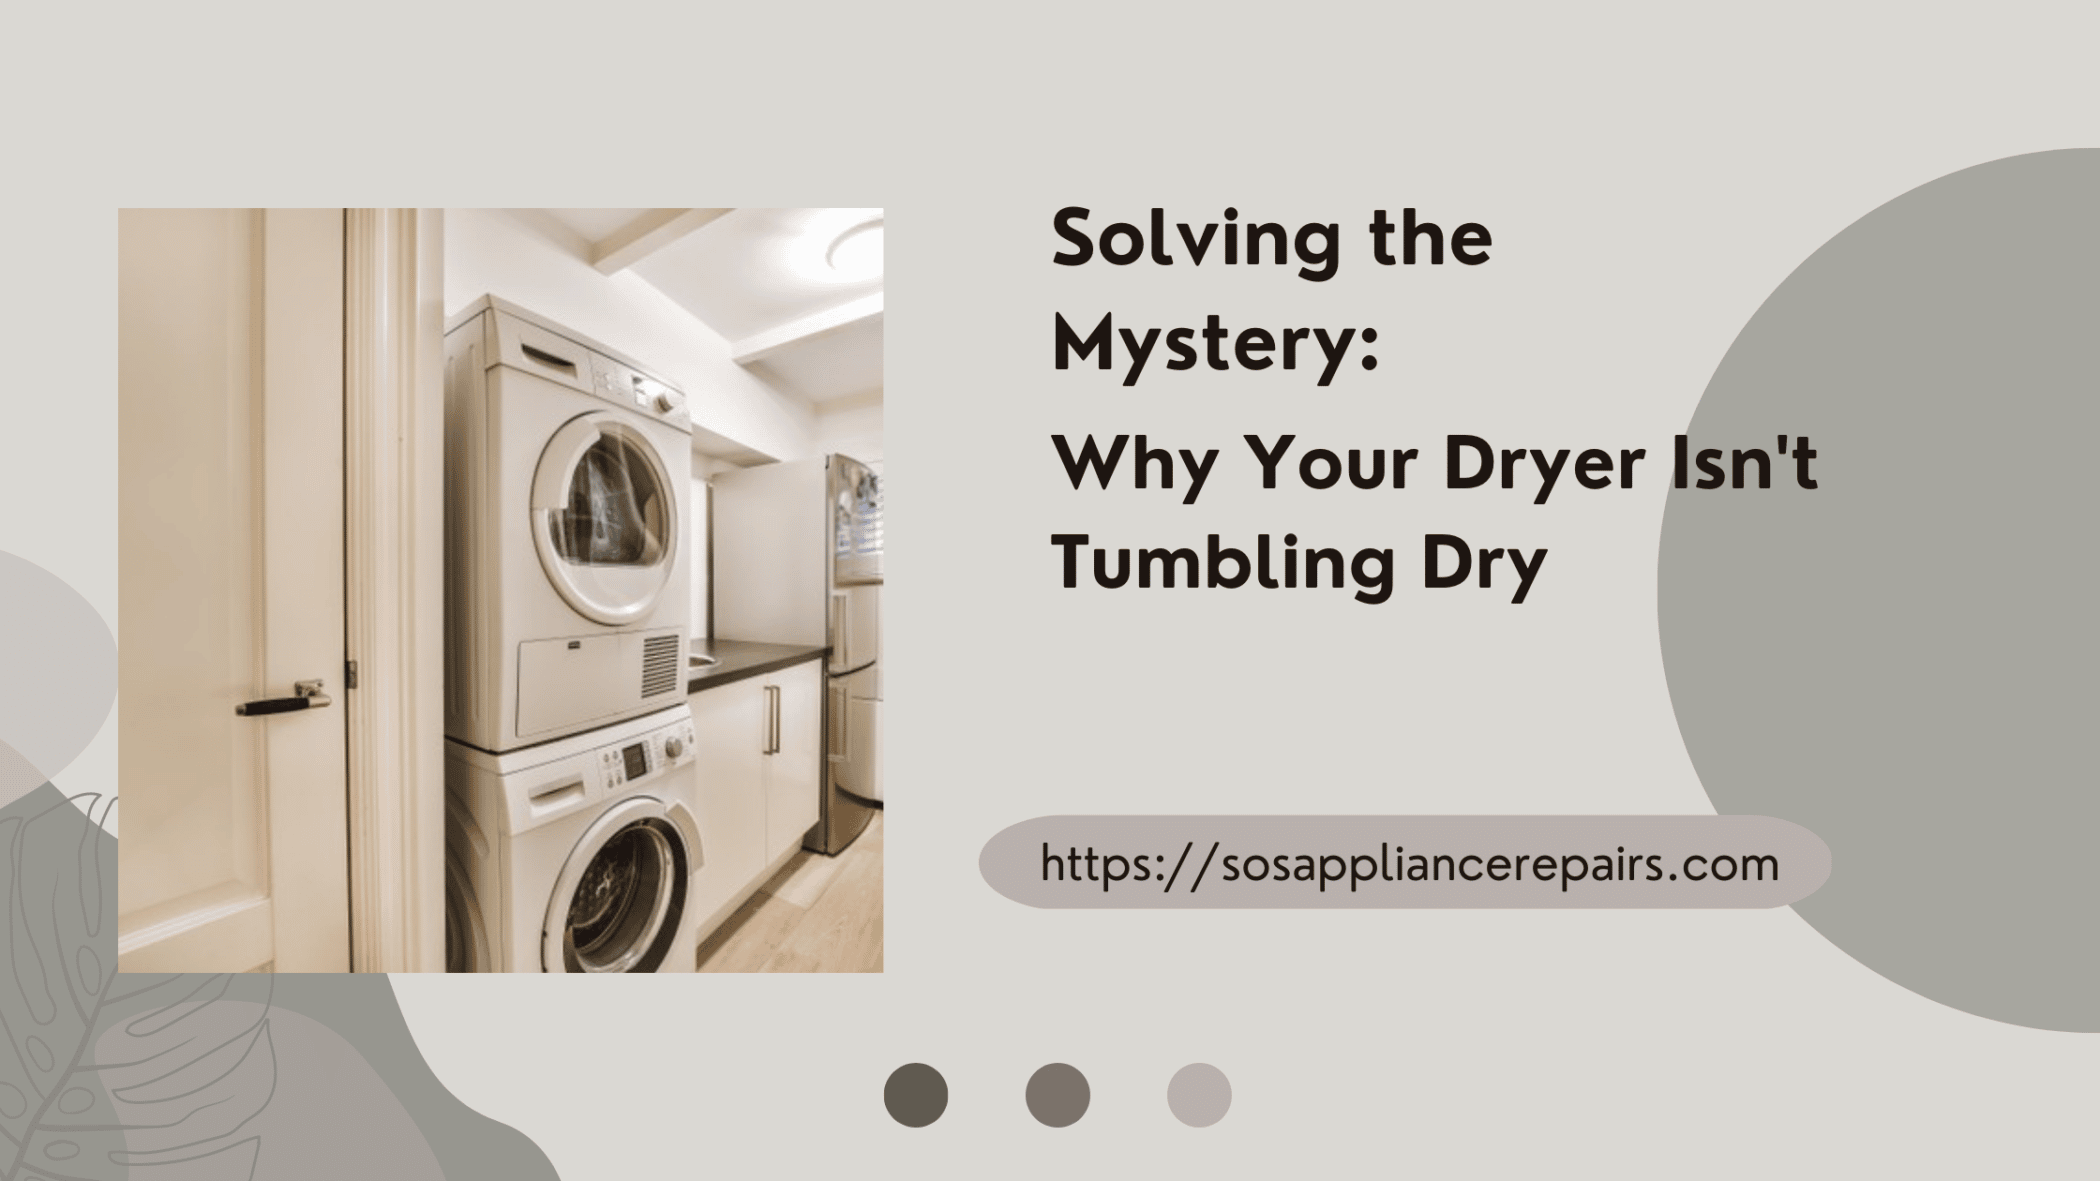 Dryer doesn’t tumble dry